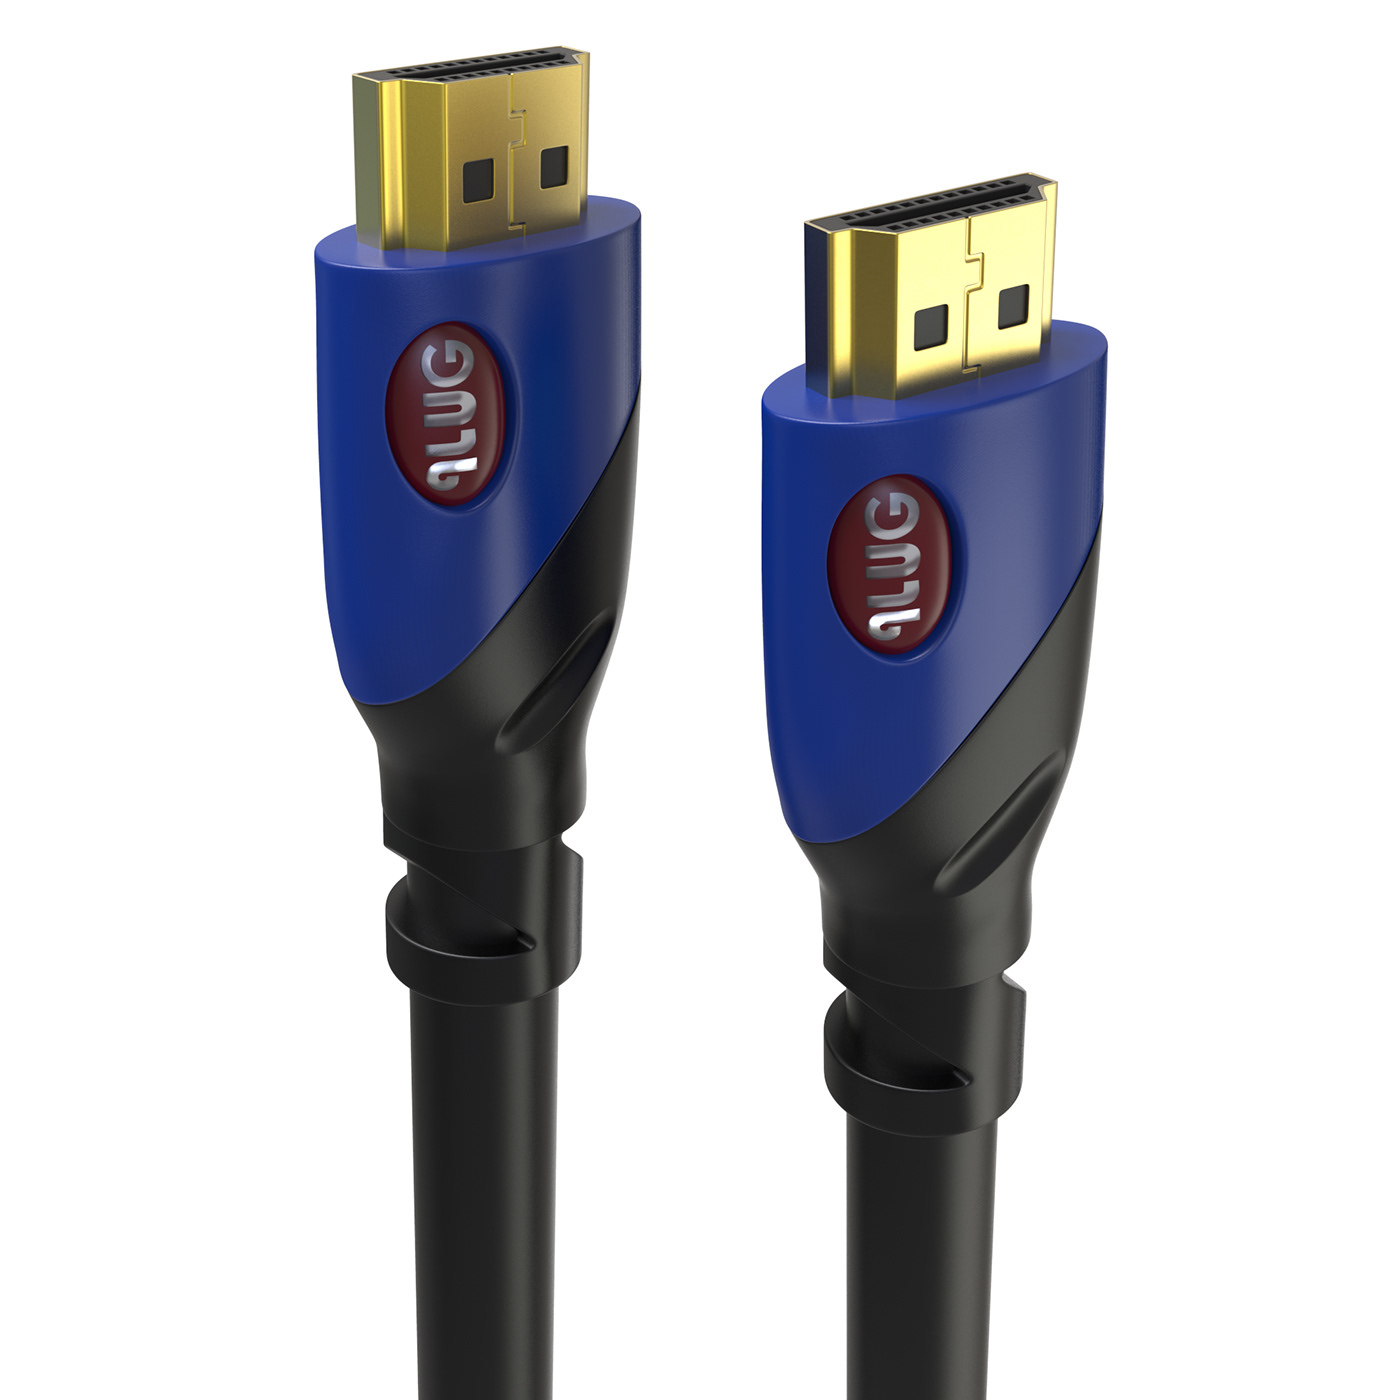 HDMI Cable 3D Render